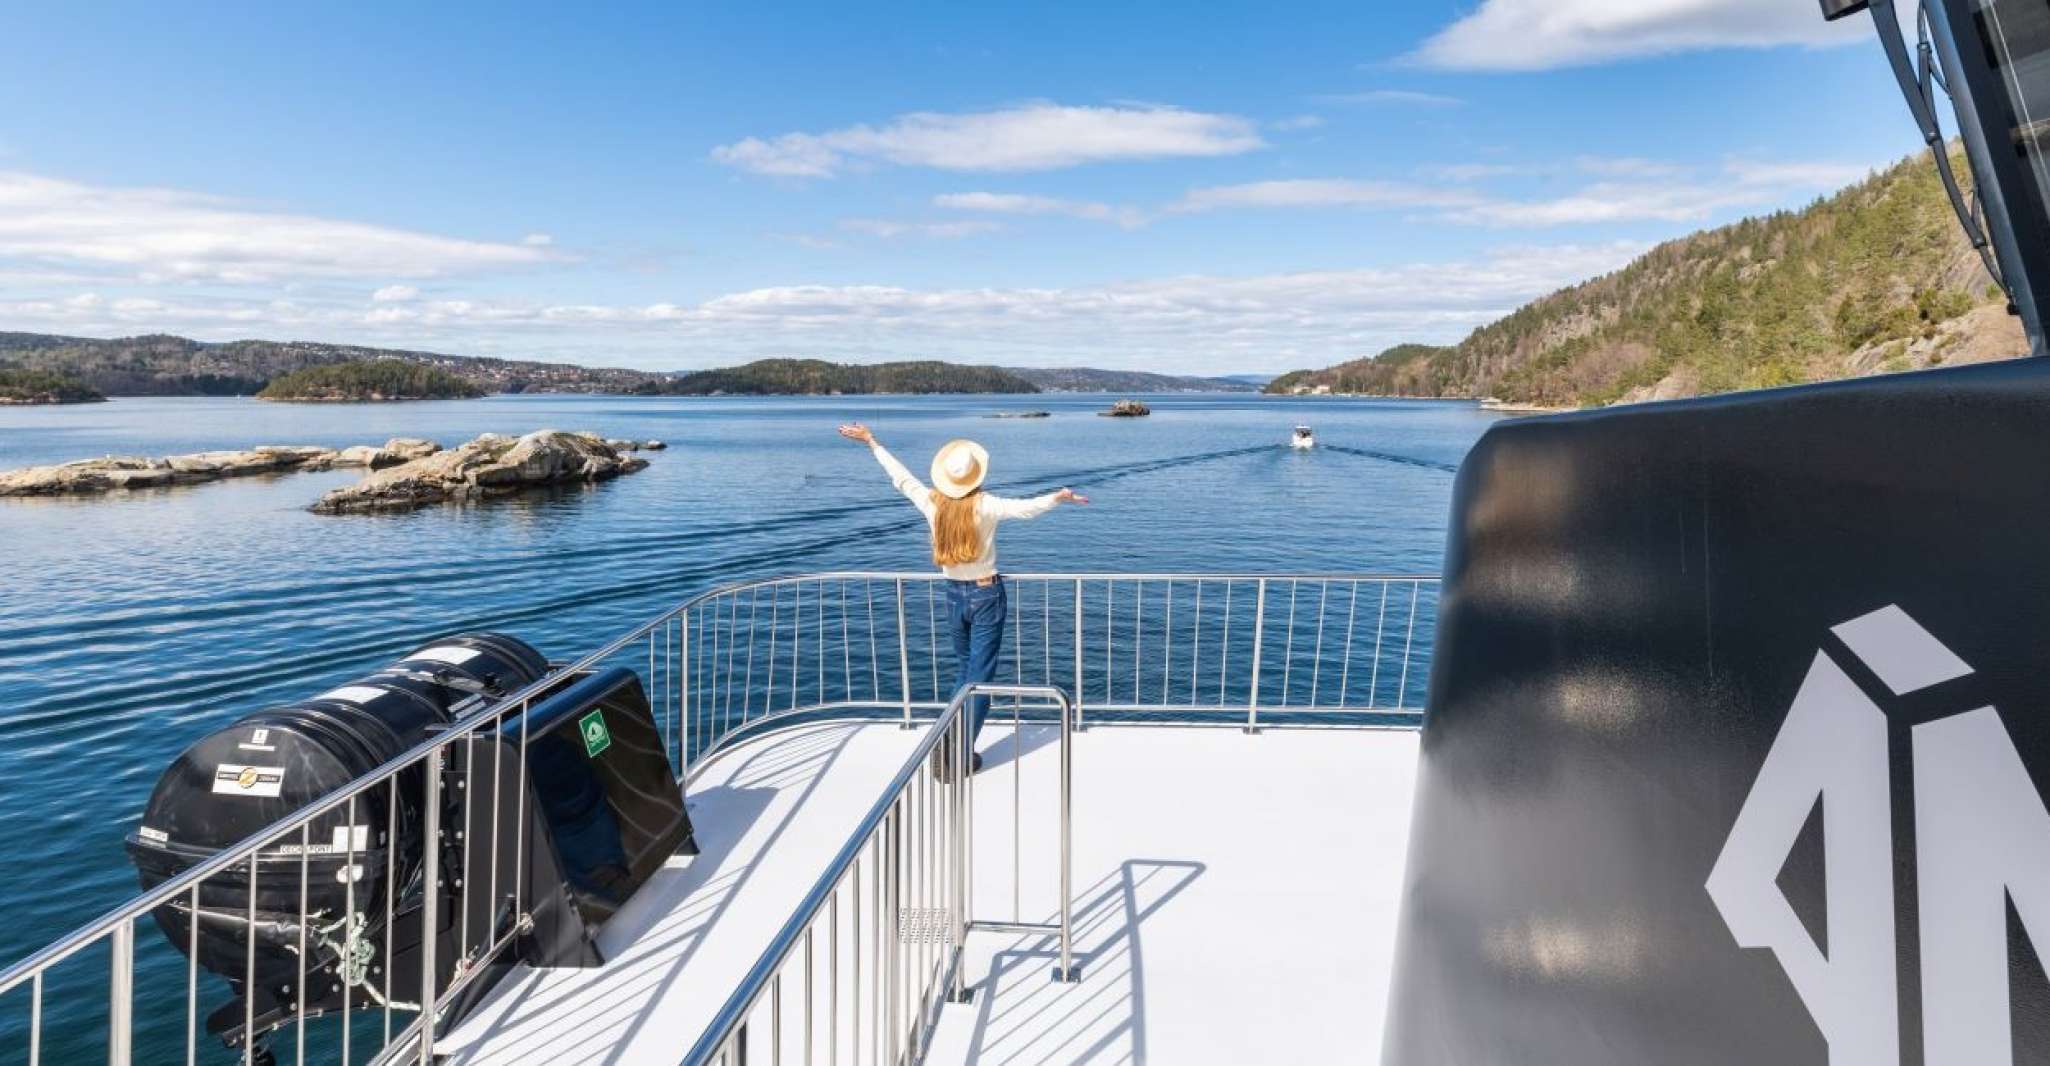 Oslo, Scenic Fjord Cruise with Audio Guide Commentary - Housity